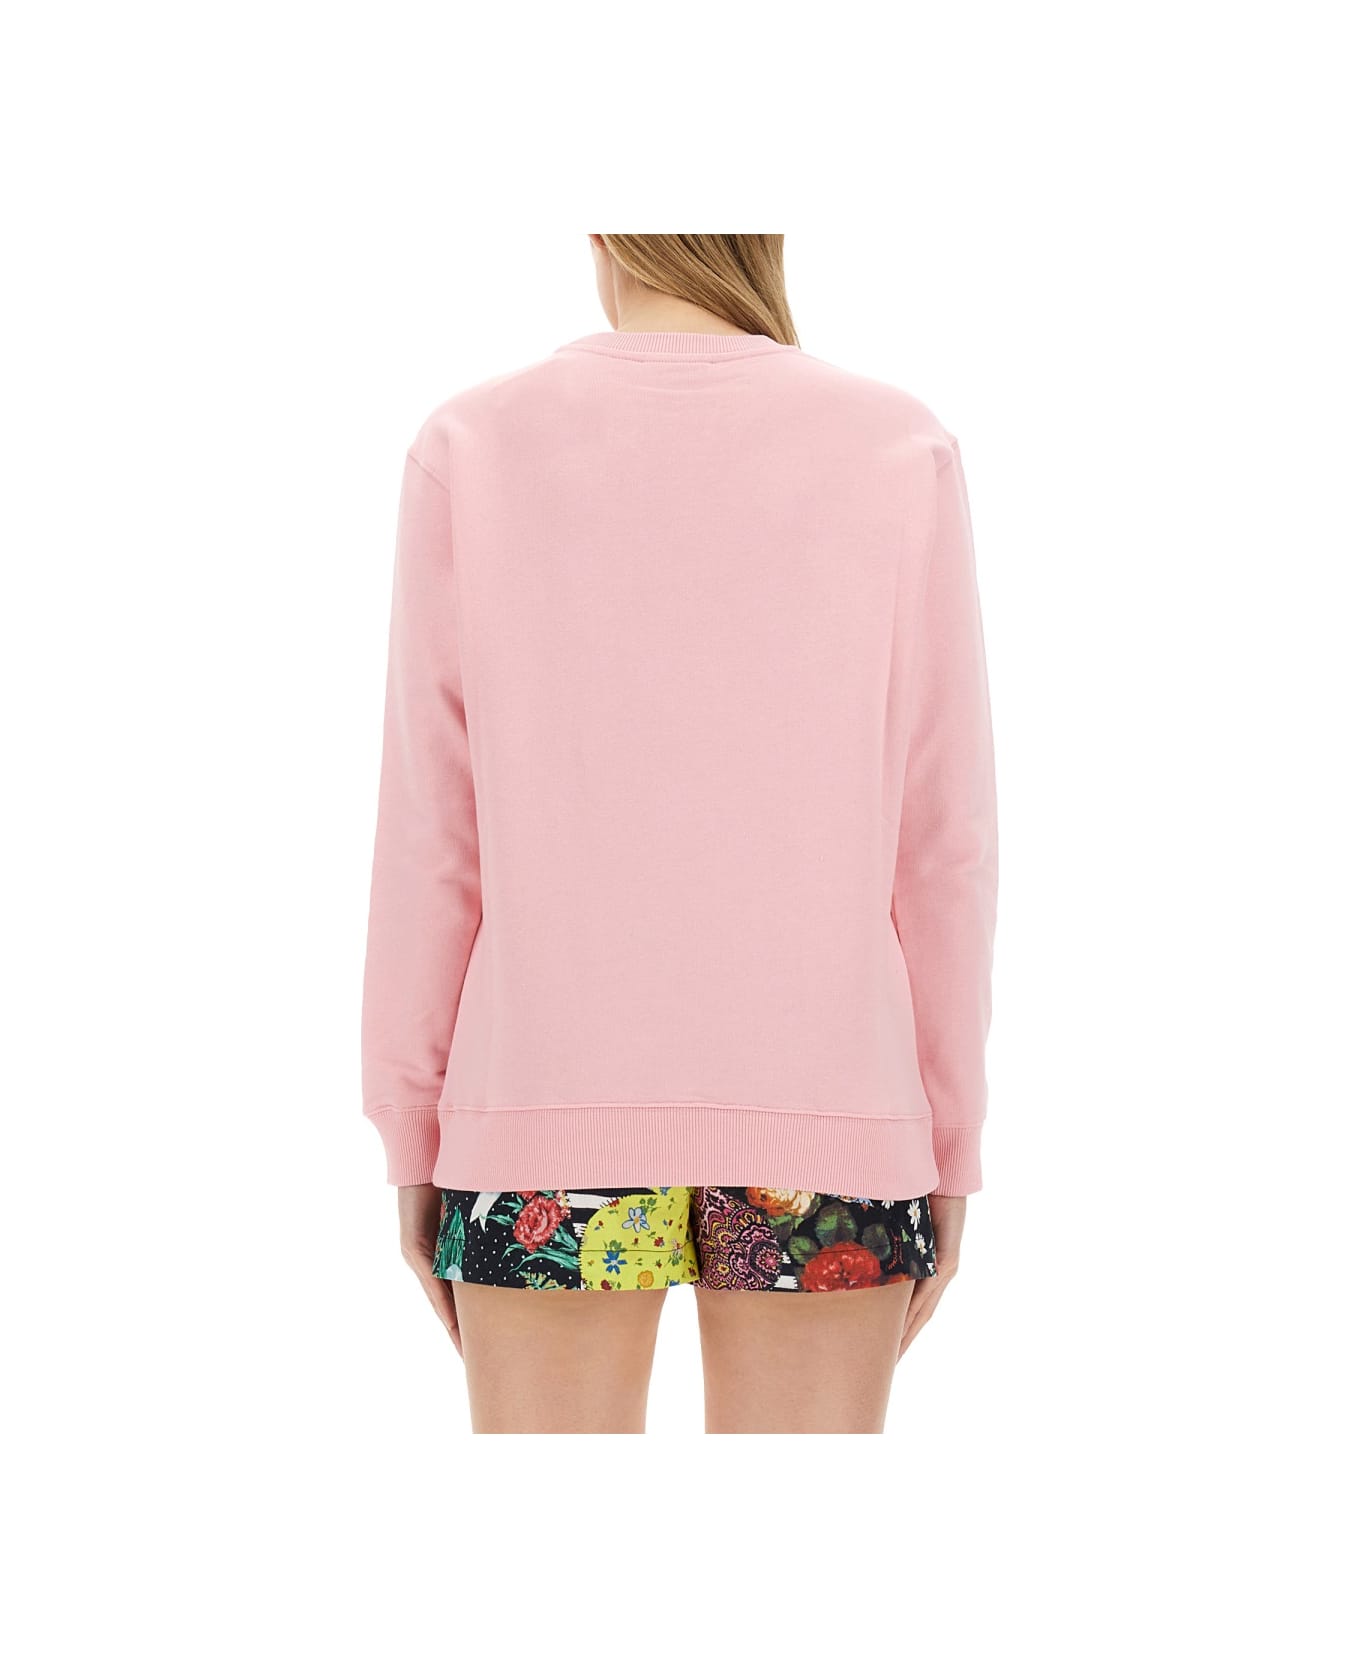 M05CH1N0 Jeans Sweatshirt With Logo - PINK